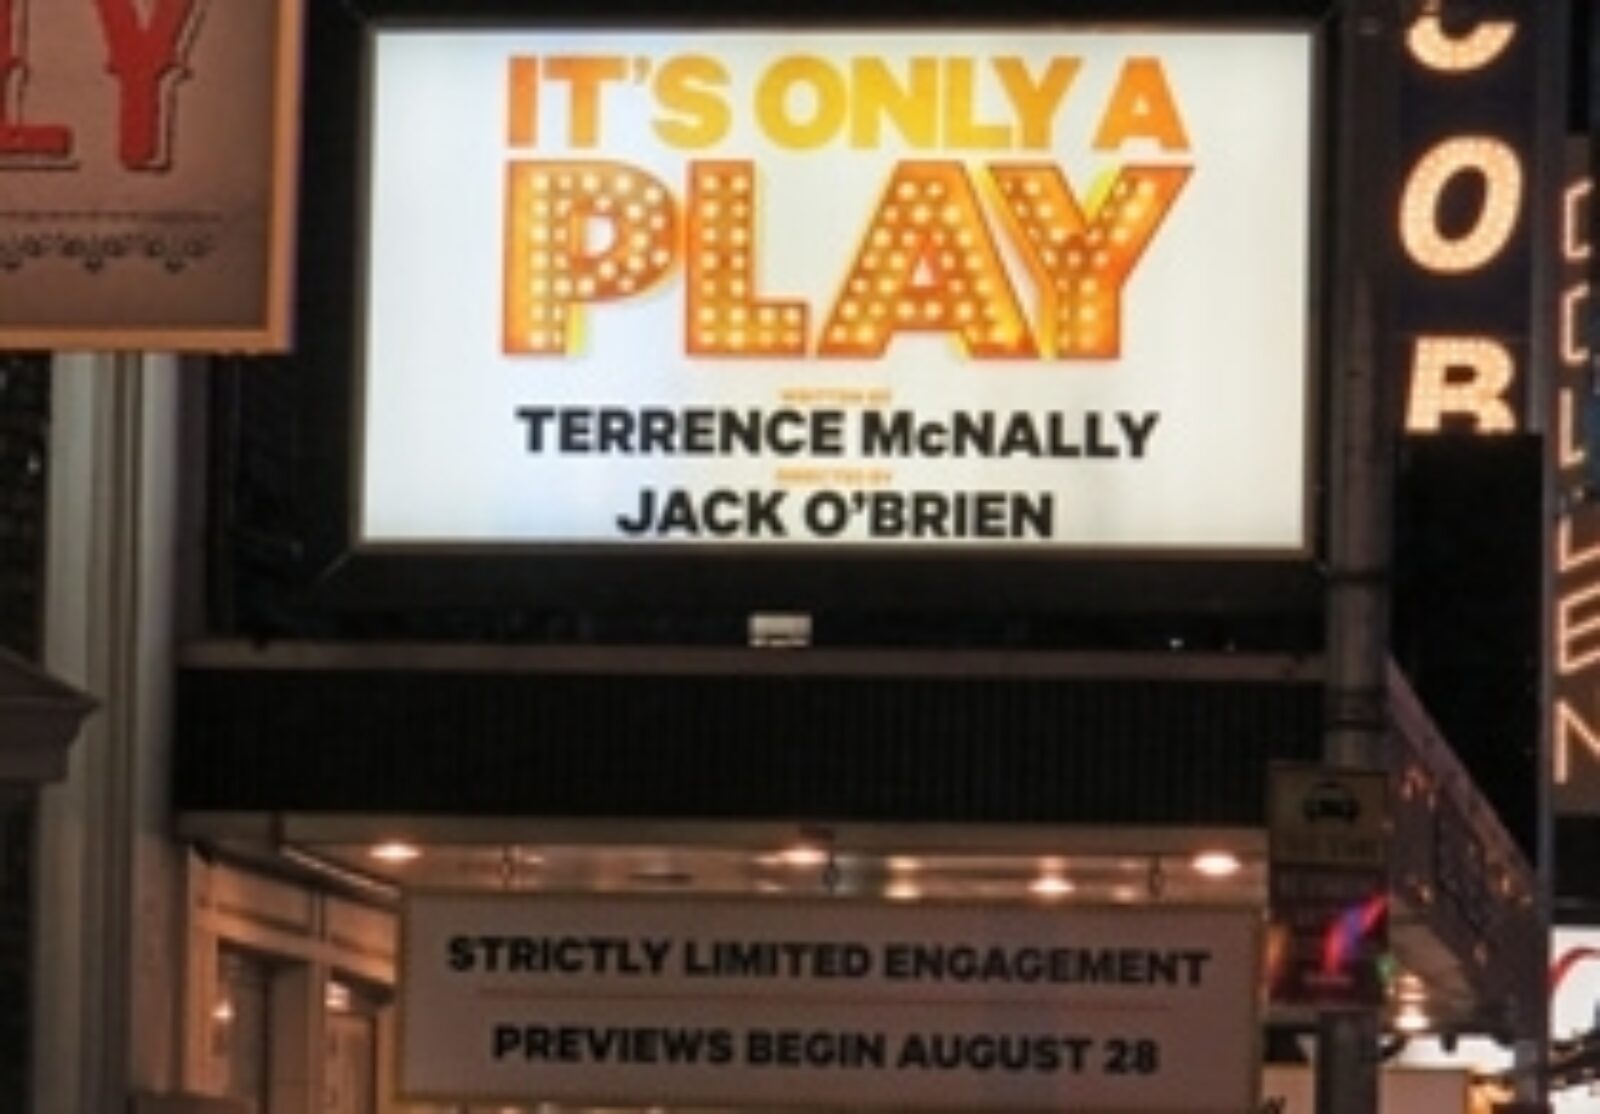 It's Only A Play Broadway Show Tickets